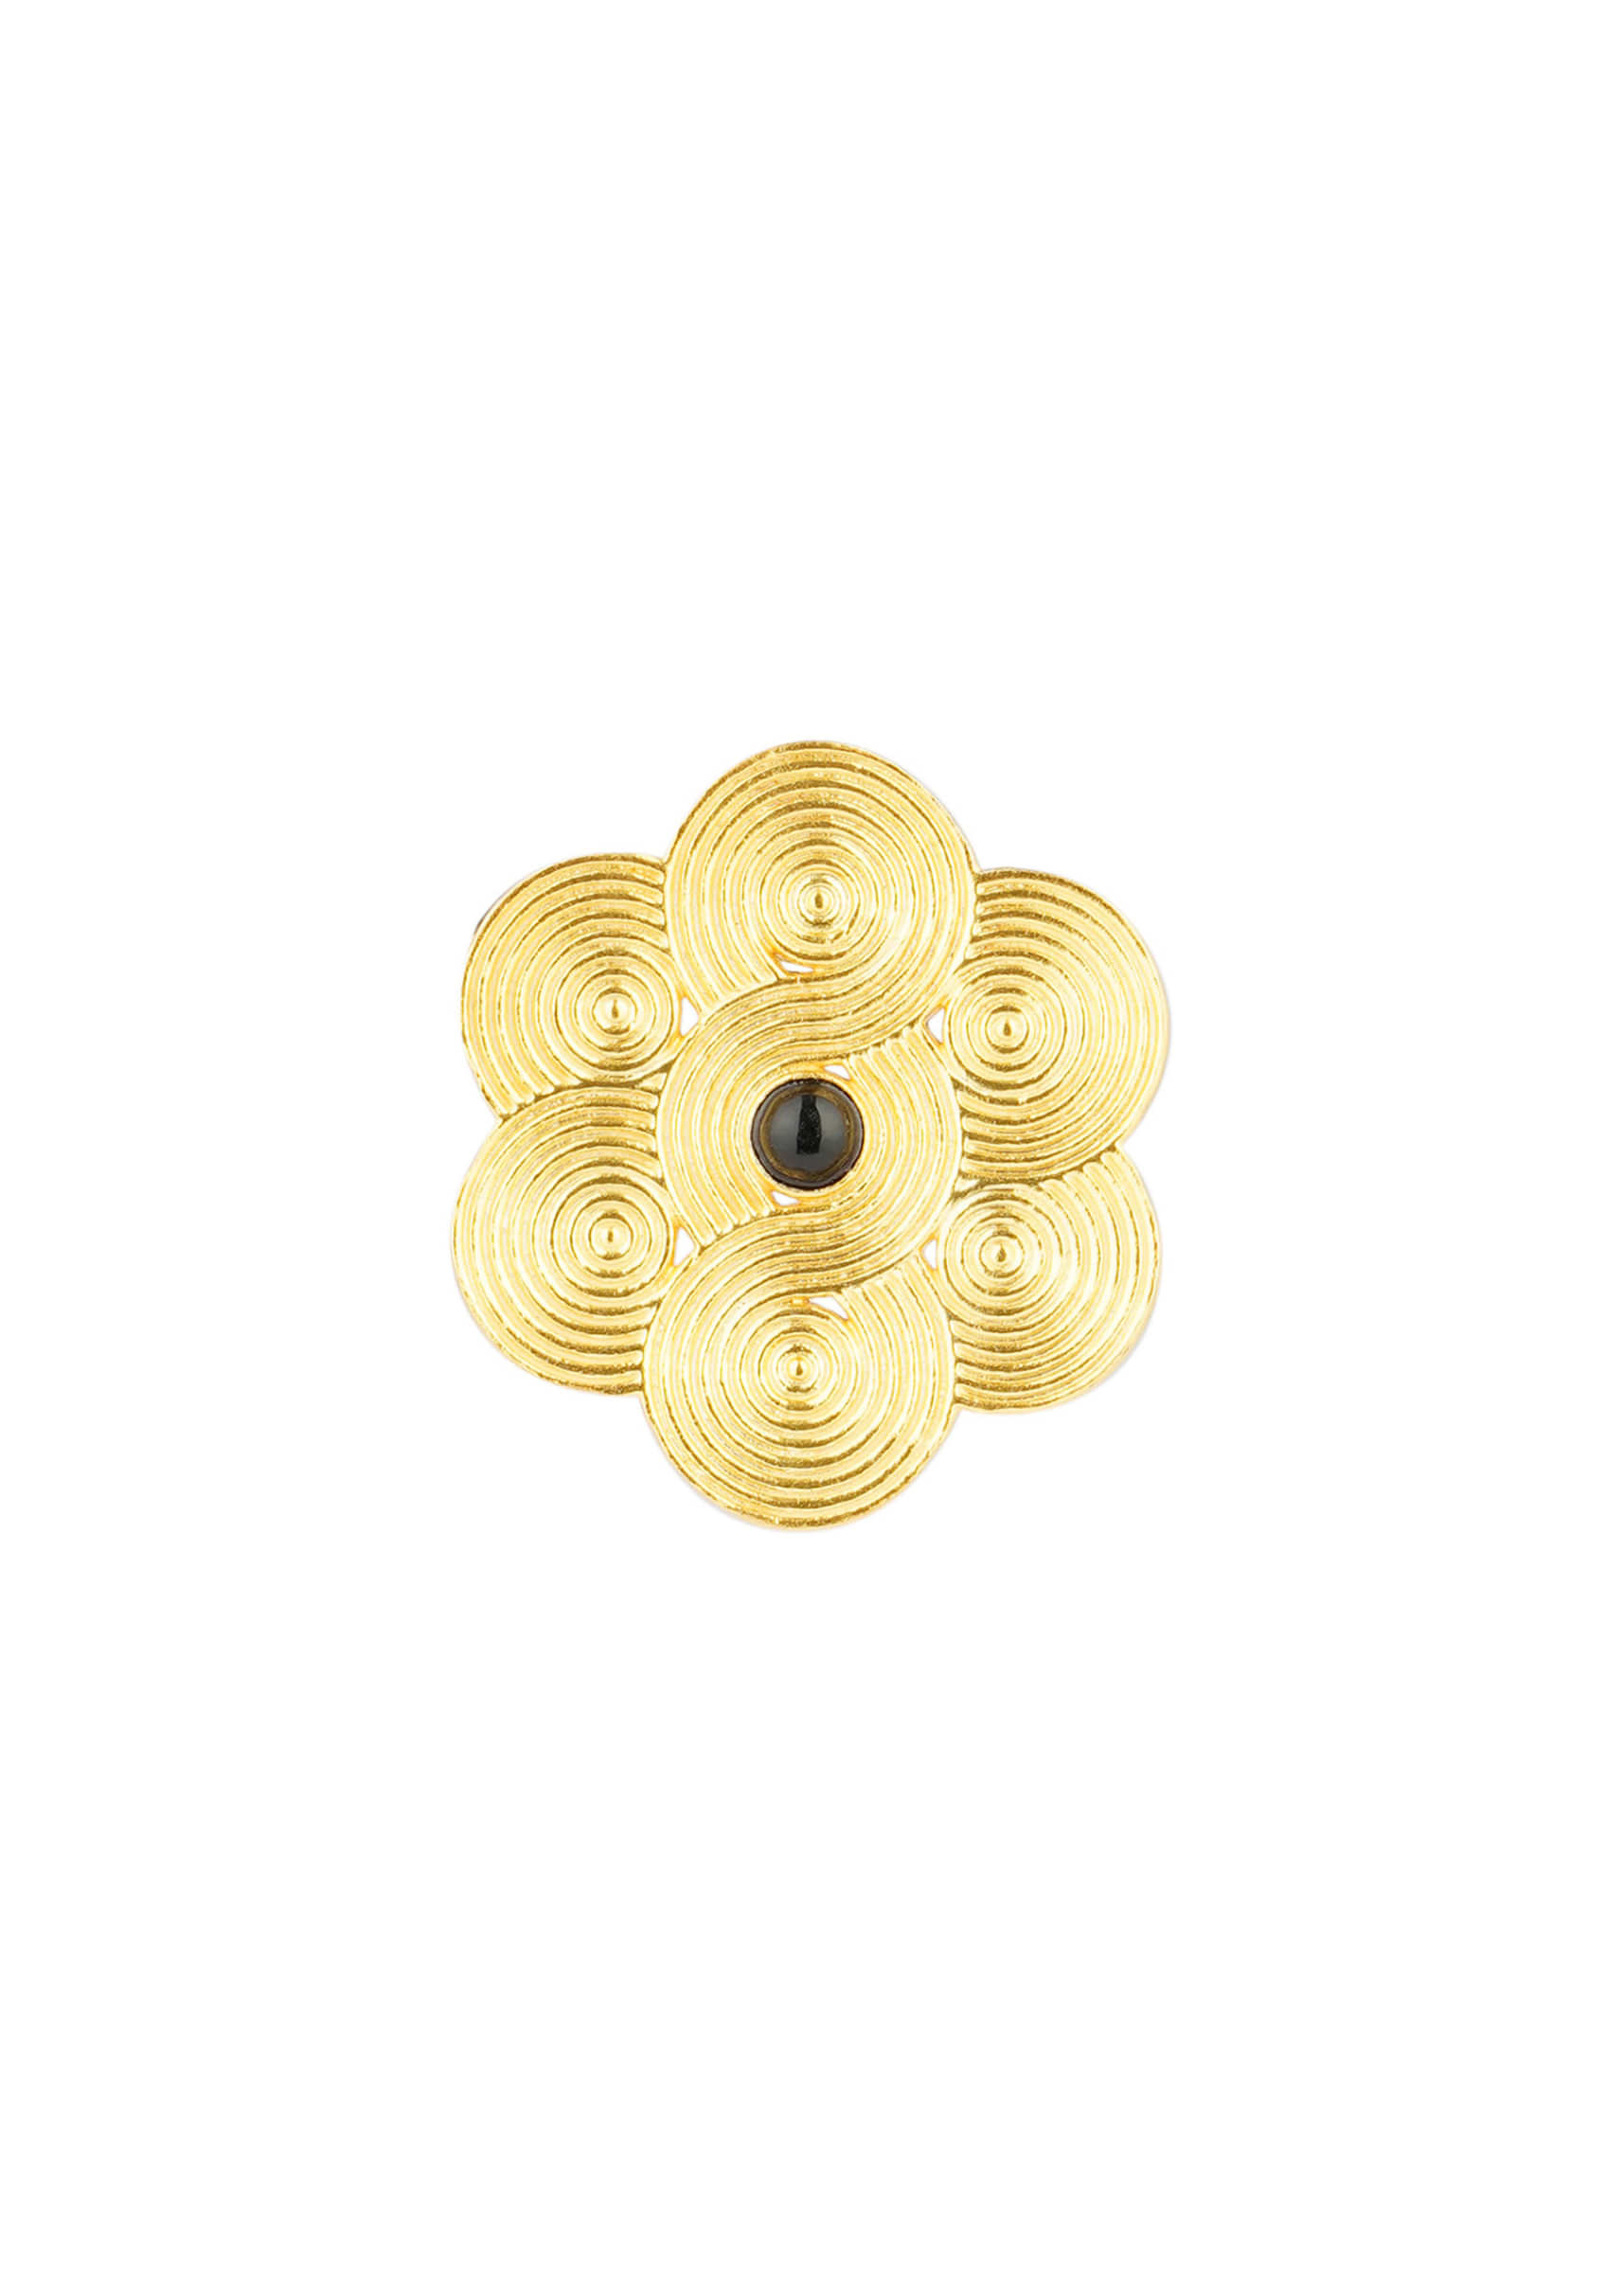 Gold Plated Stud Earrings In Floral Design Embellished With Black Onyx Stone In The Centre